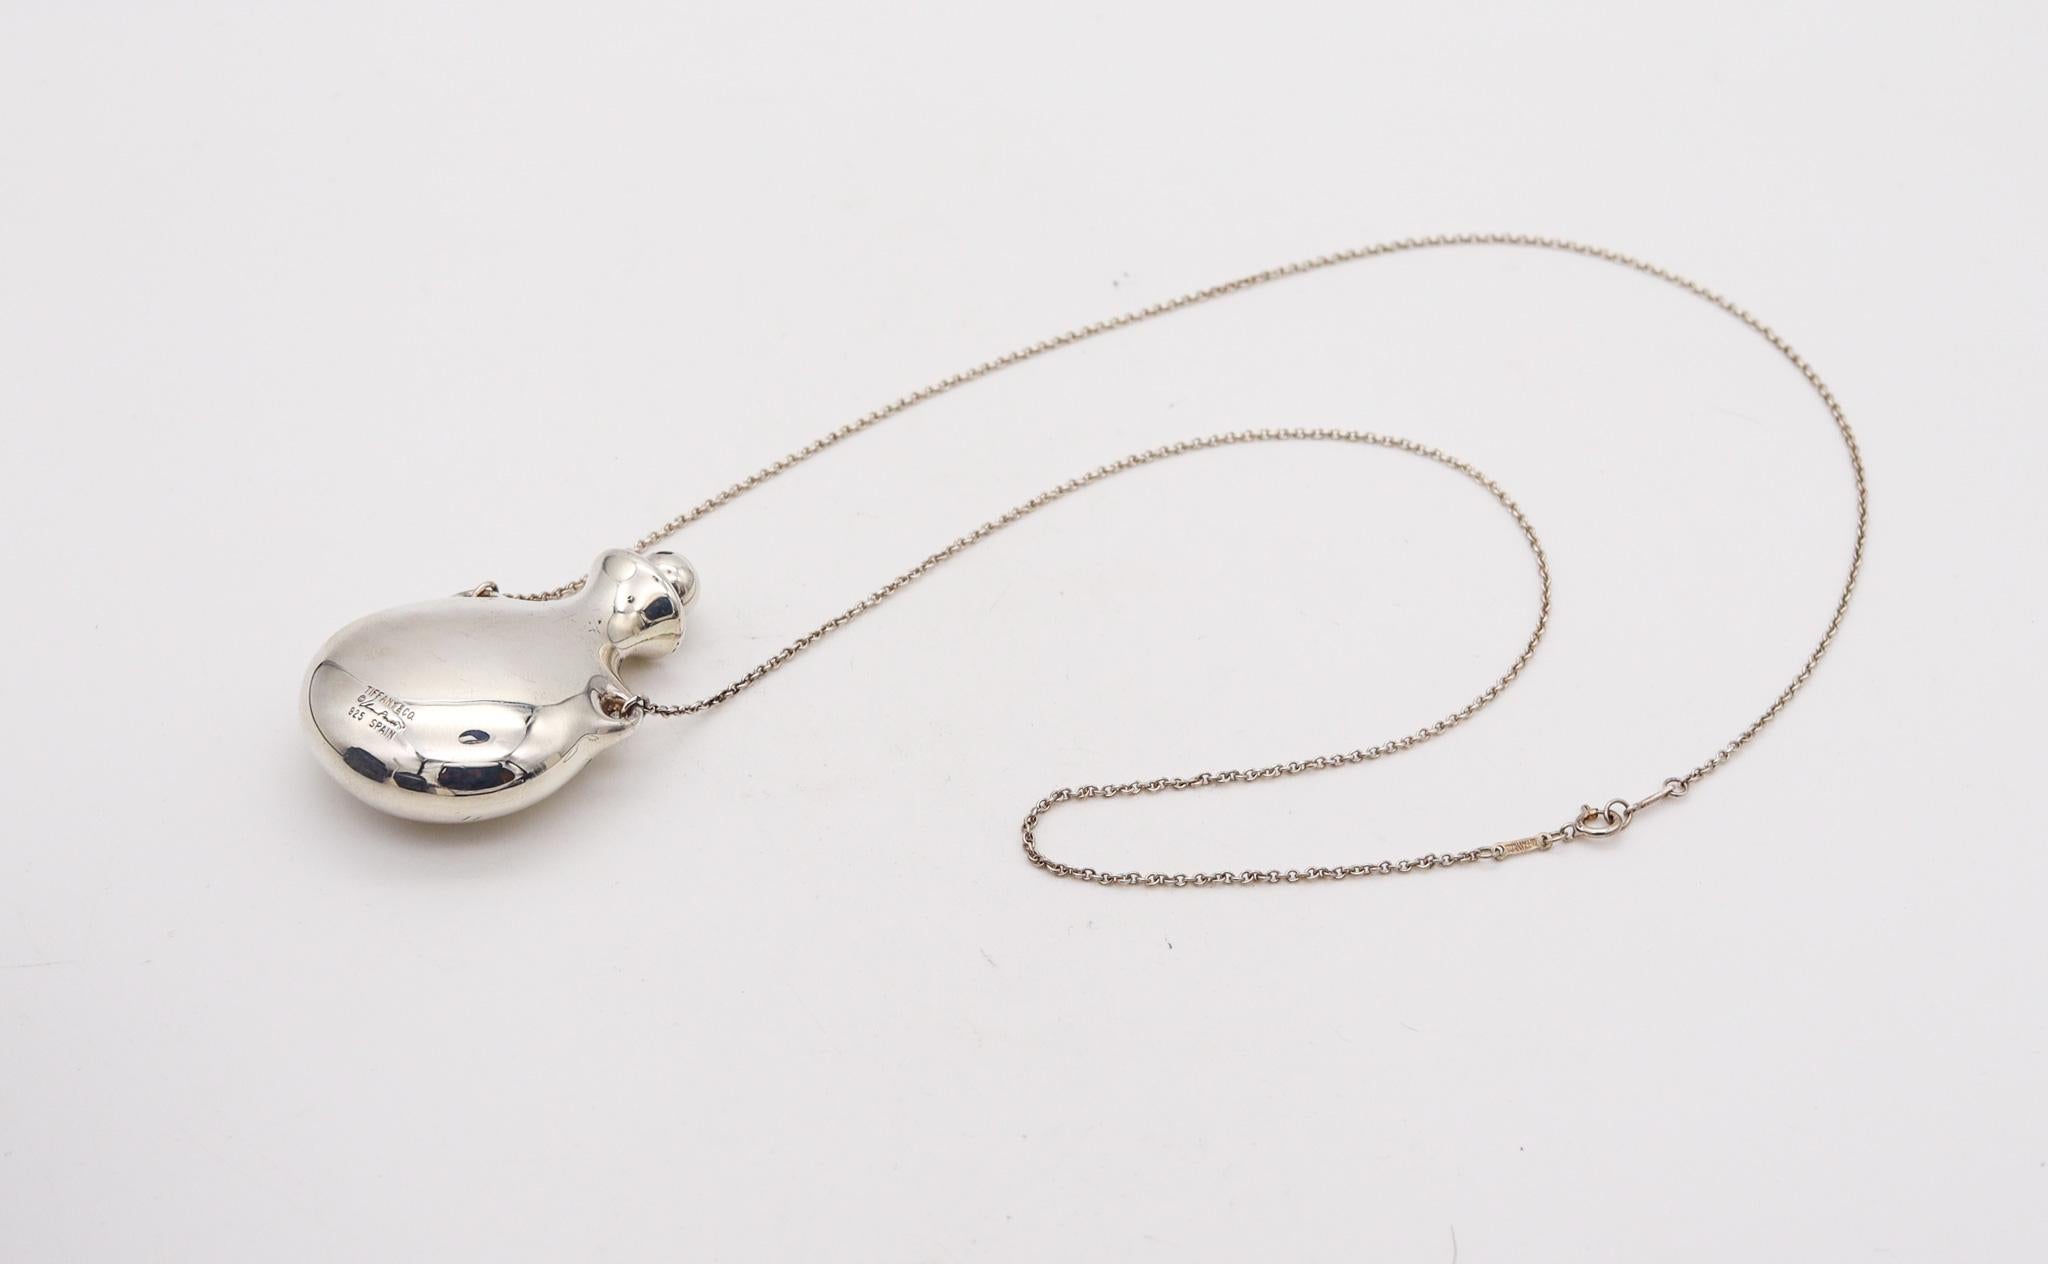 Bottle necklace designed by Elsa Peretti (1940-2019) for Tiffany & Co.

Fabulous freeform open bottle created by Elsa Peretti for the Tiffany Studios back in the 1978. This iconic vintage pendant necklace has been crafted at the Tiffany Studios in